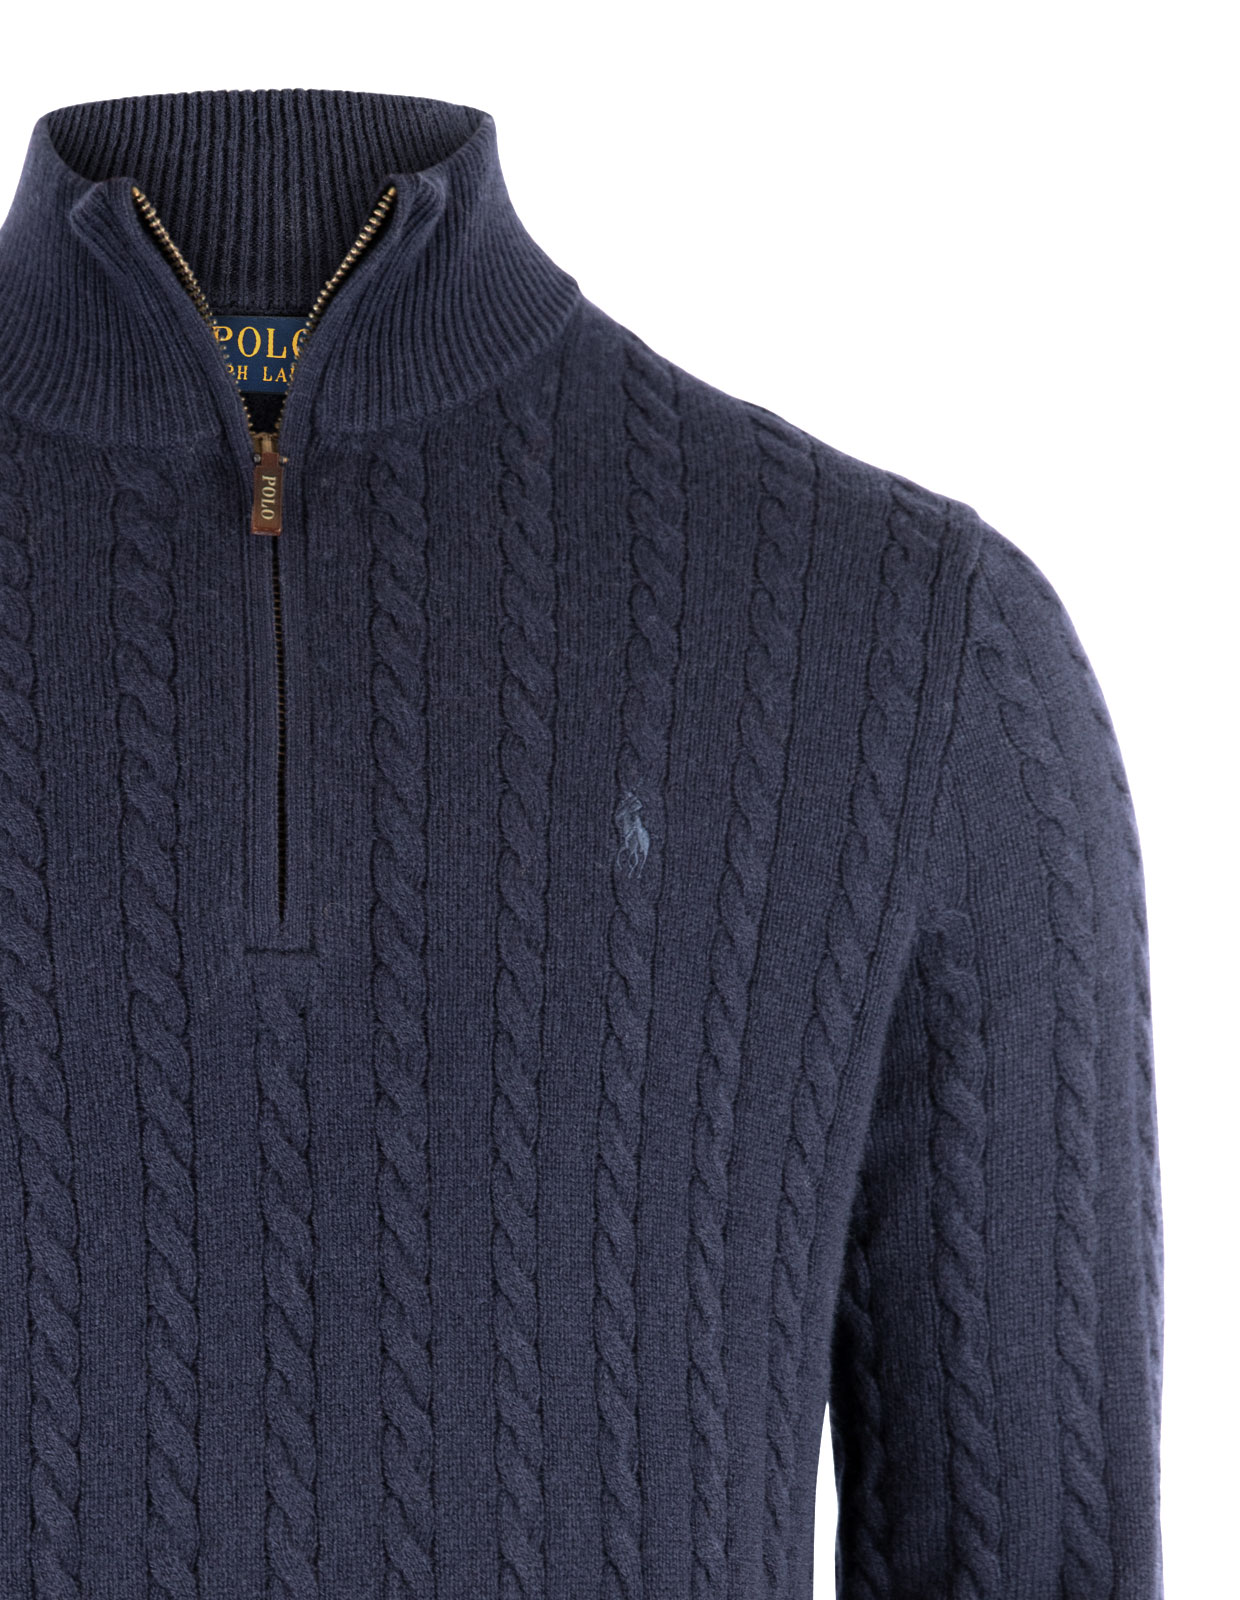 Half Zip Cable Knit Pullover Hunter Navy